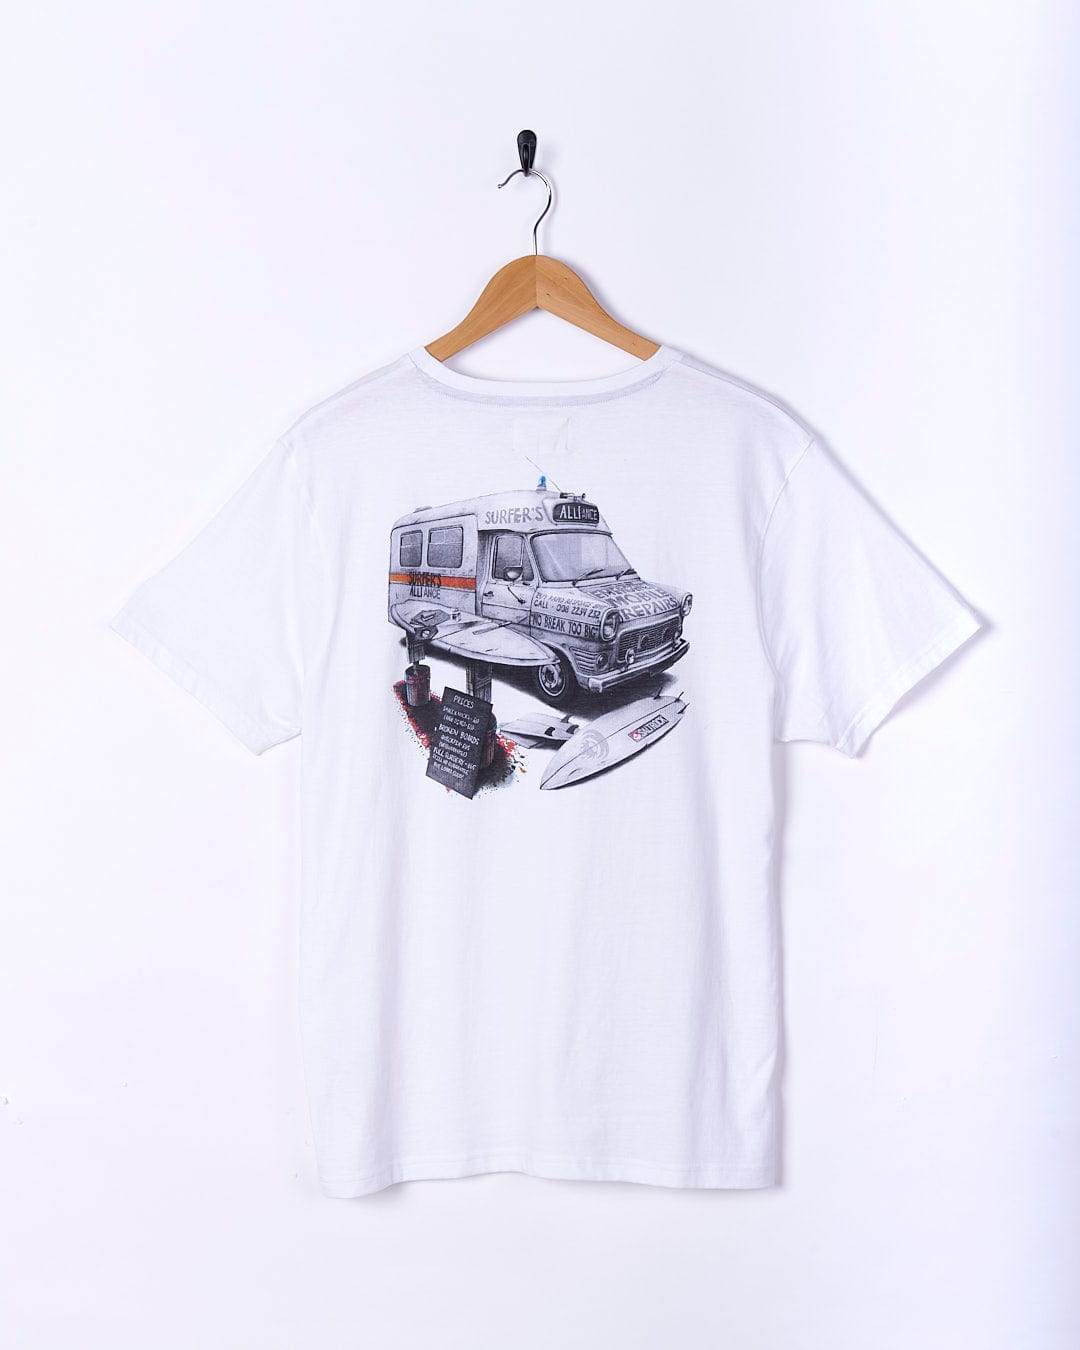 A Saltrock Ambulance - Mens Short Sleeve T-Shirt - White with an image of an ambulance on it.